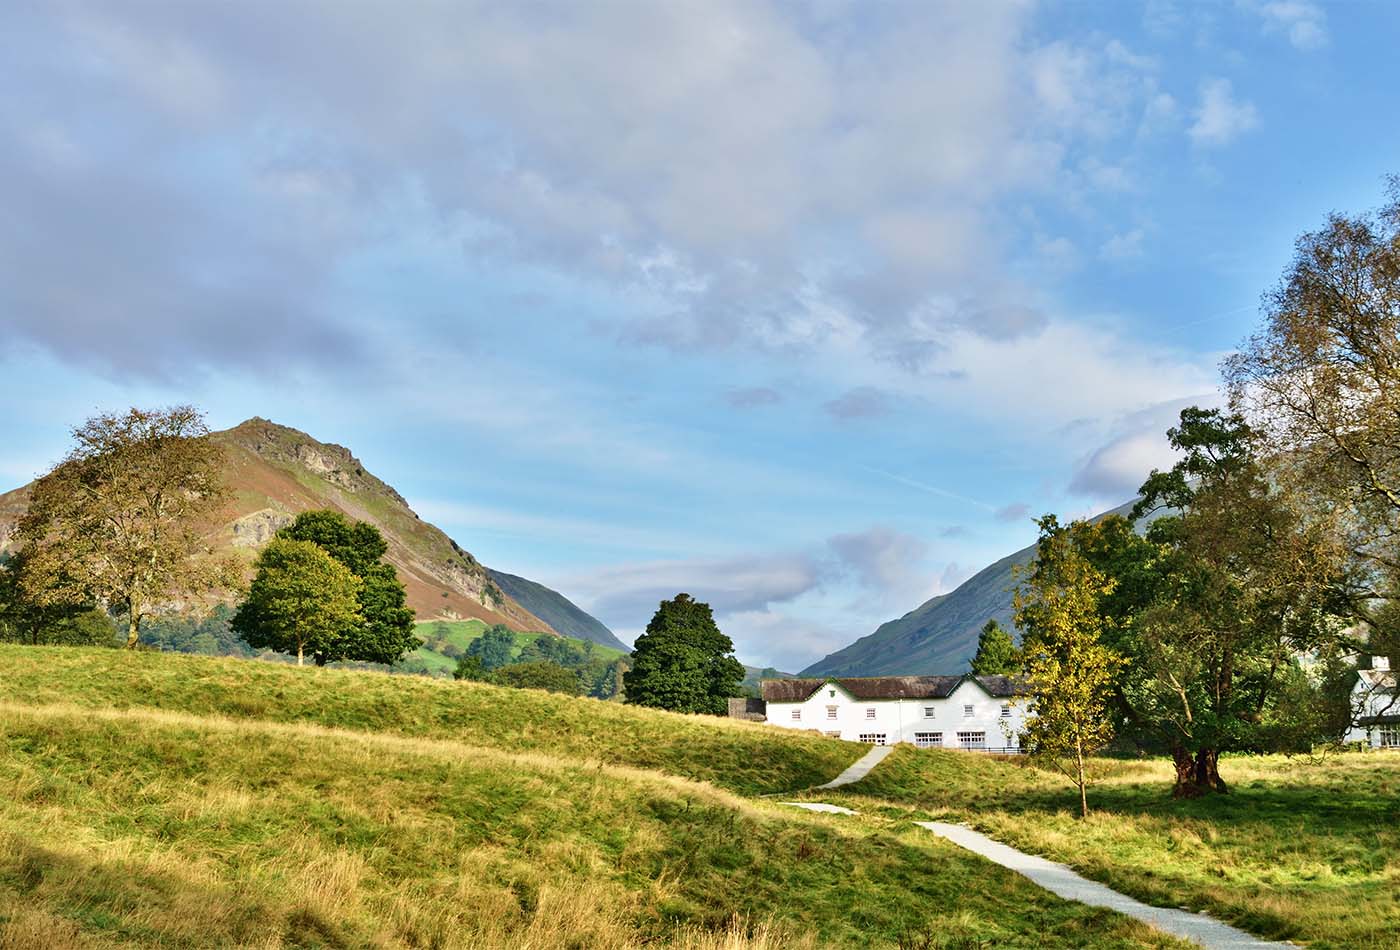 A path winding its way through green fields, from Grasmere, towards Helm Crag, on a tranquil summers day in the English Lake District.